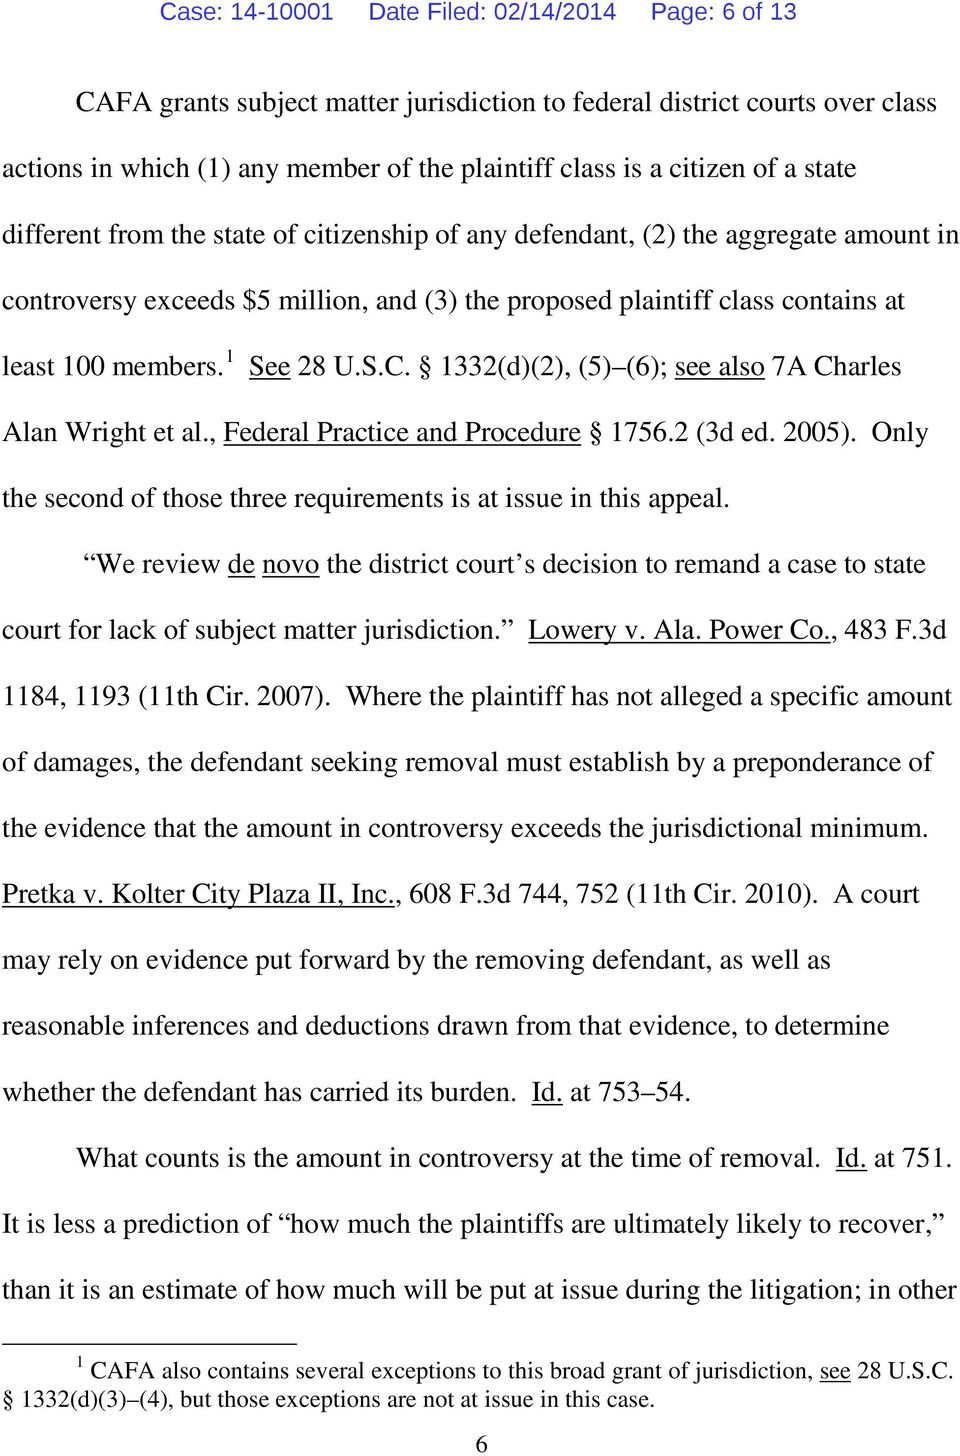 1 See 28 U.S.C. 1332(d)(2), (5) (6); see also 7A Charles Alan Wright et al., Federal Practice and Procedure 1756.2 (3d ed. 2005).